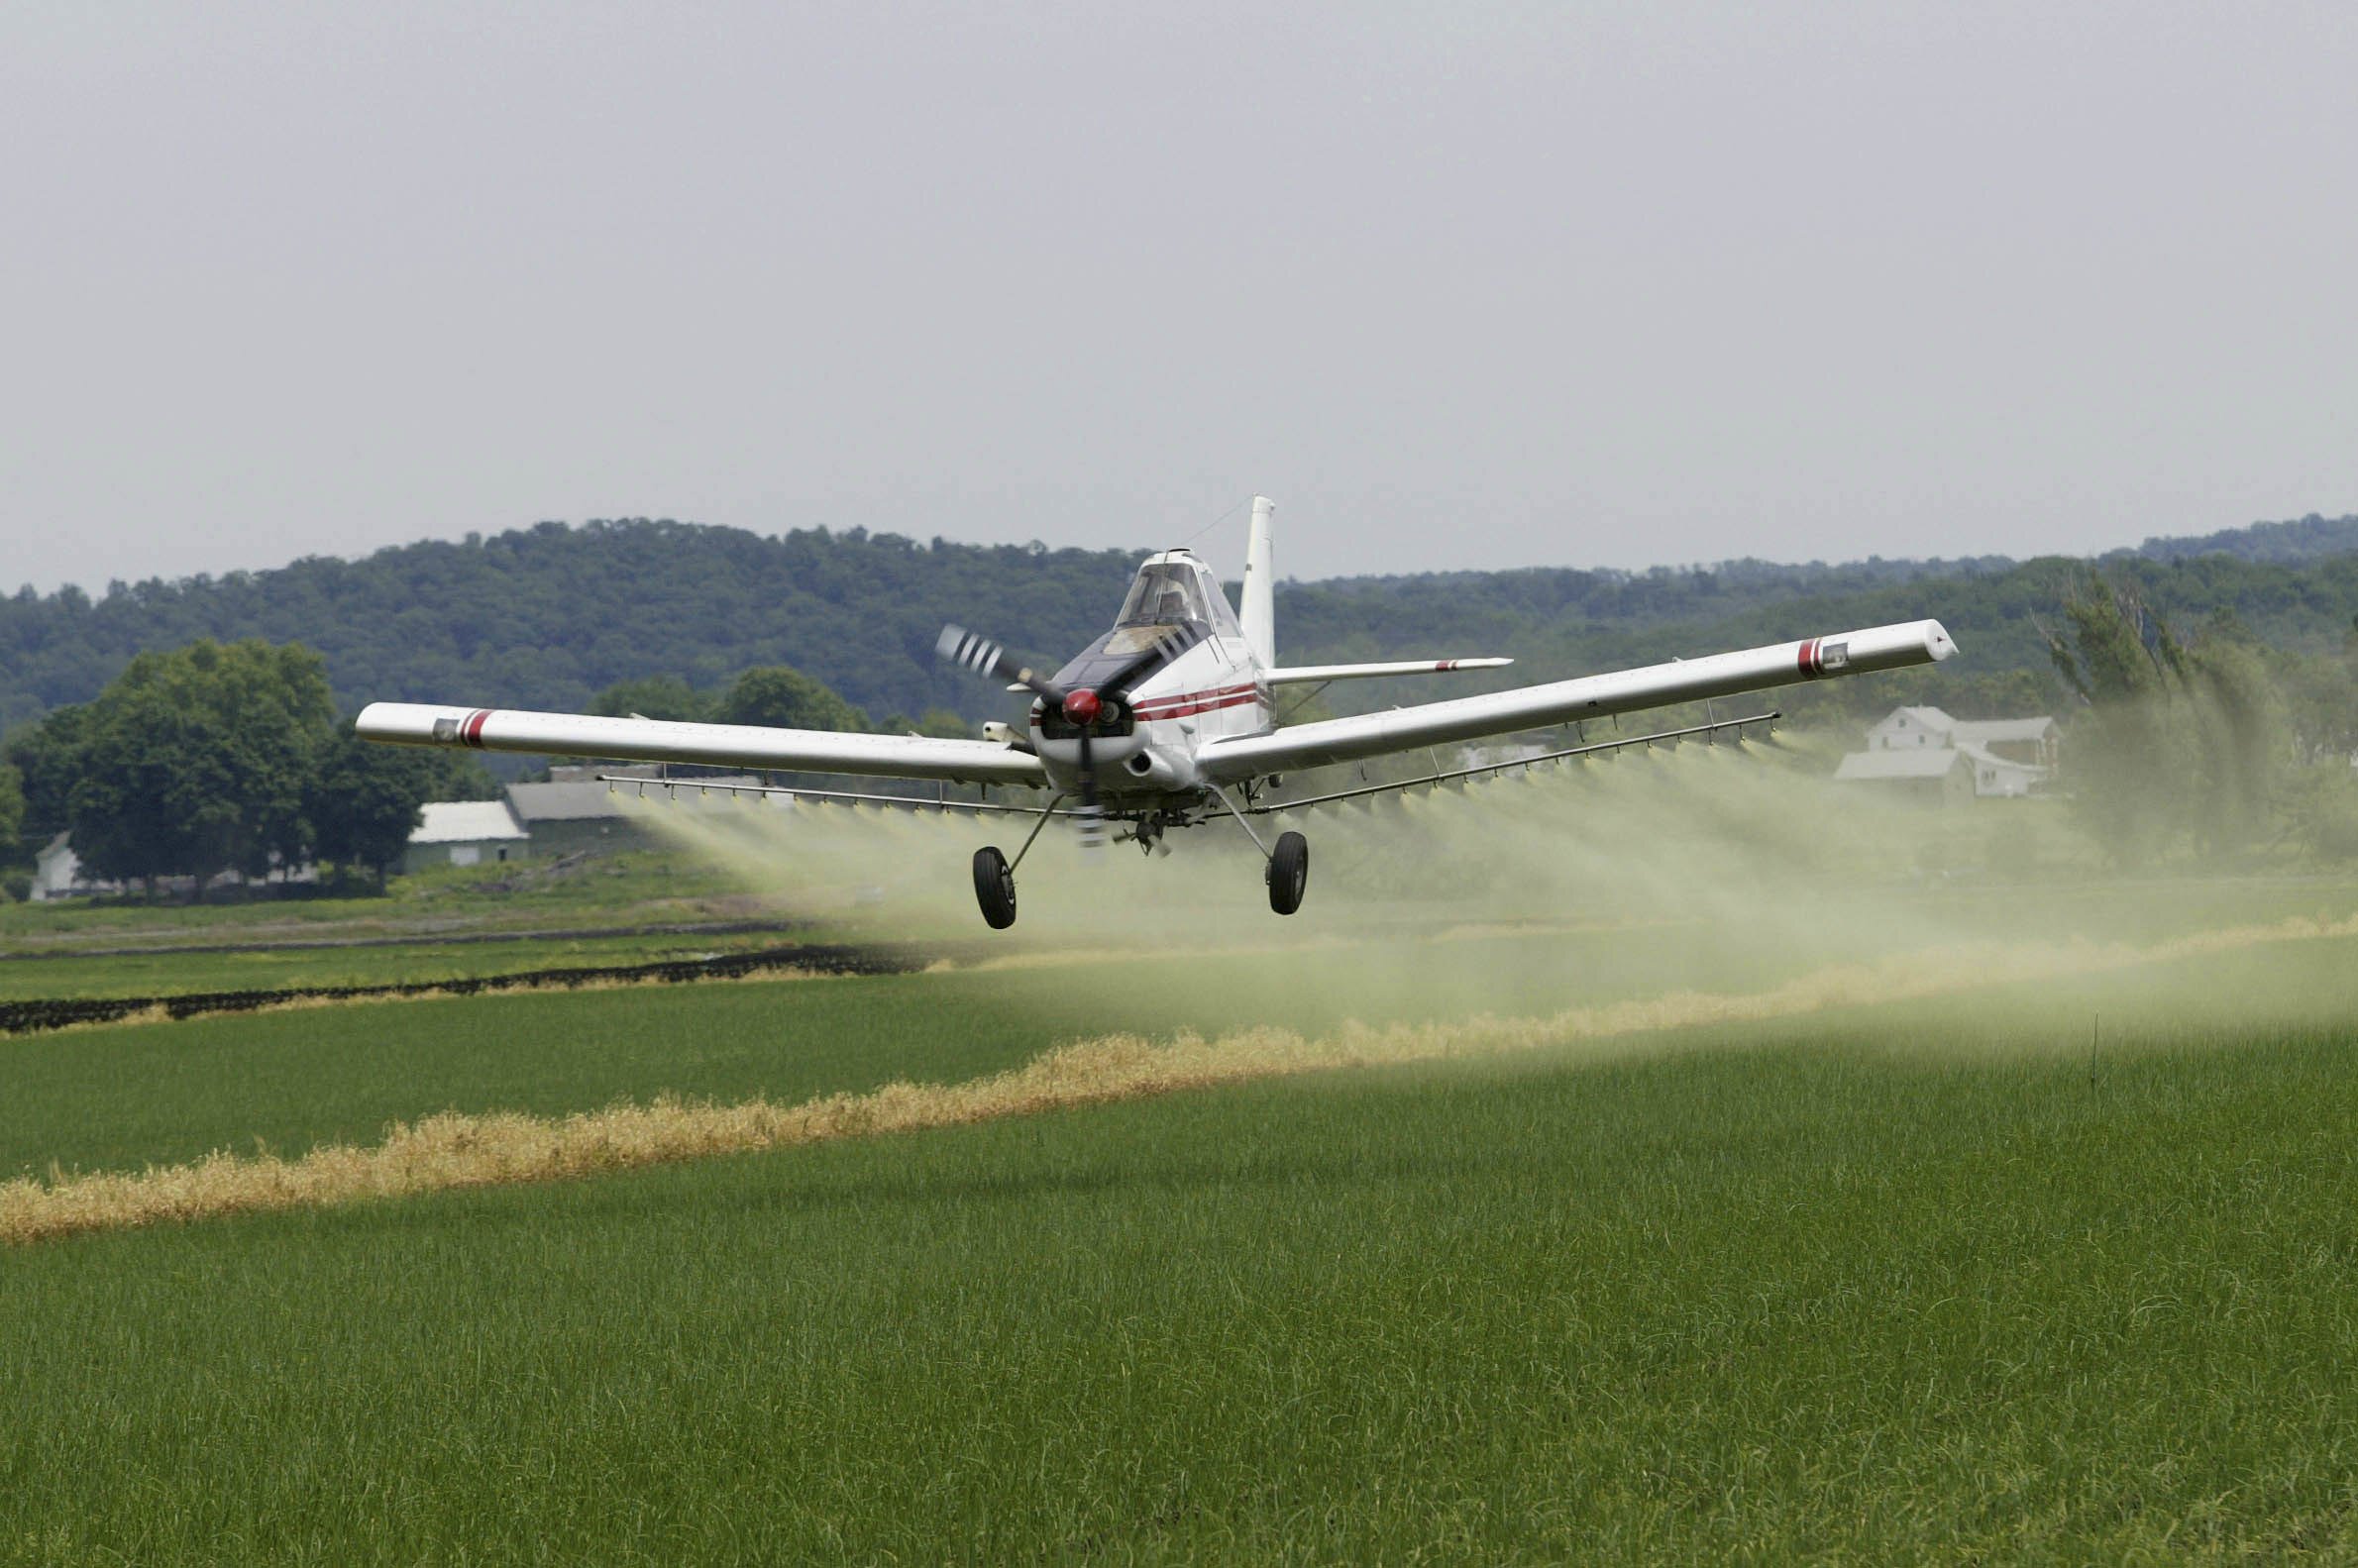 A crop-spraying plane in action. In his new book Earth Detox, Australian science writer Julian Cribb warns of a “man-made chemical assault on ourselves and life on Earth”. Photo: Tony  Savino/Corbis via Getty Images